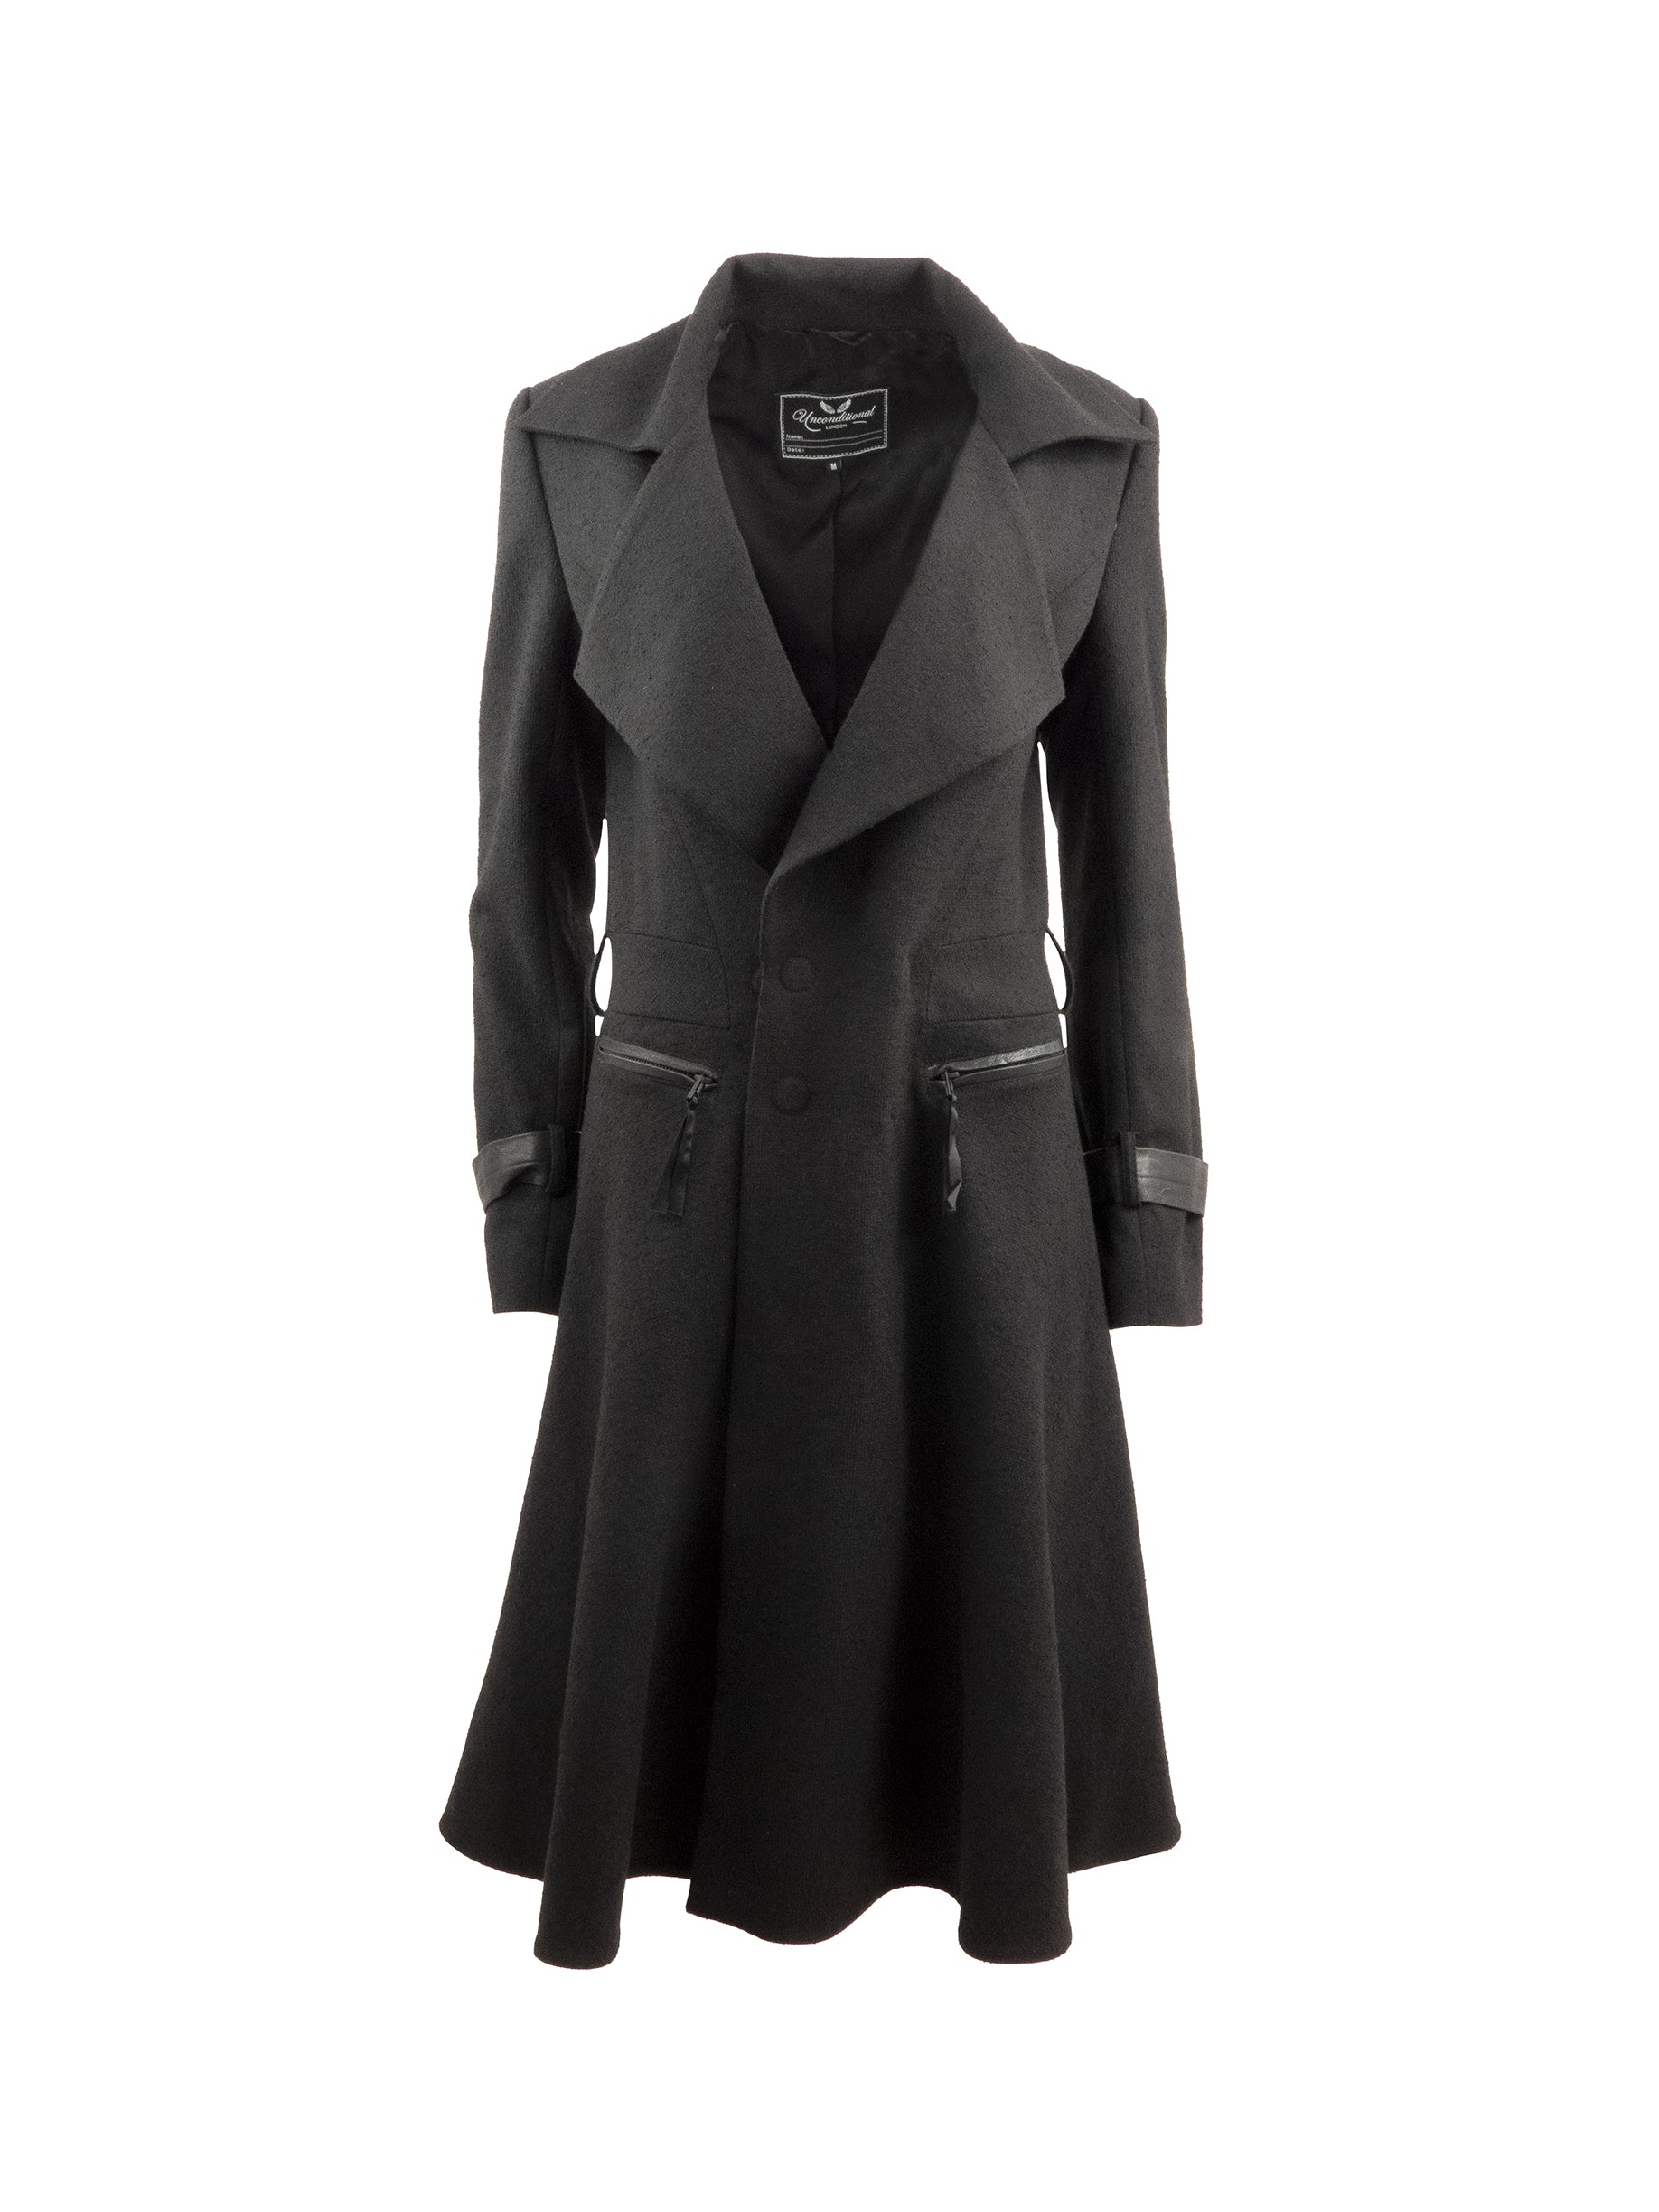 LOW DOUBLE BREASTED WOOL COAT WITH LEATHER DETAILING